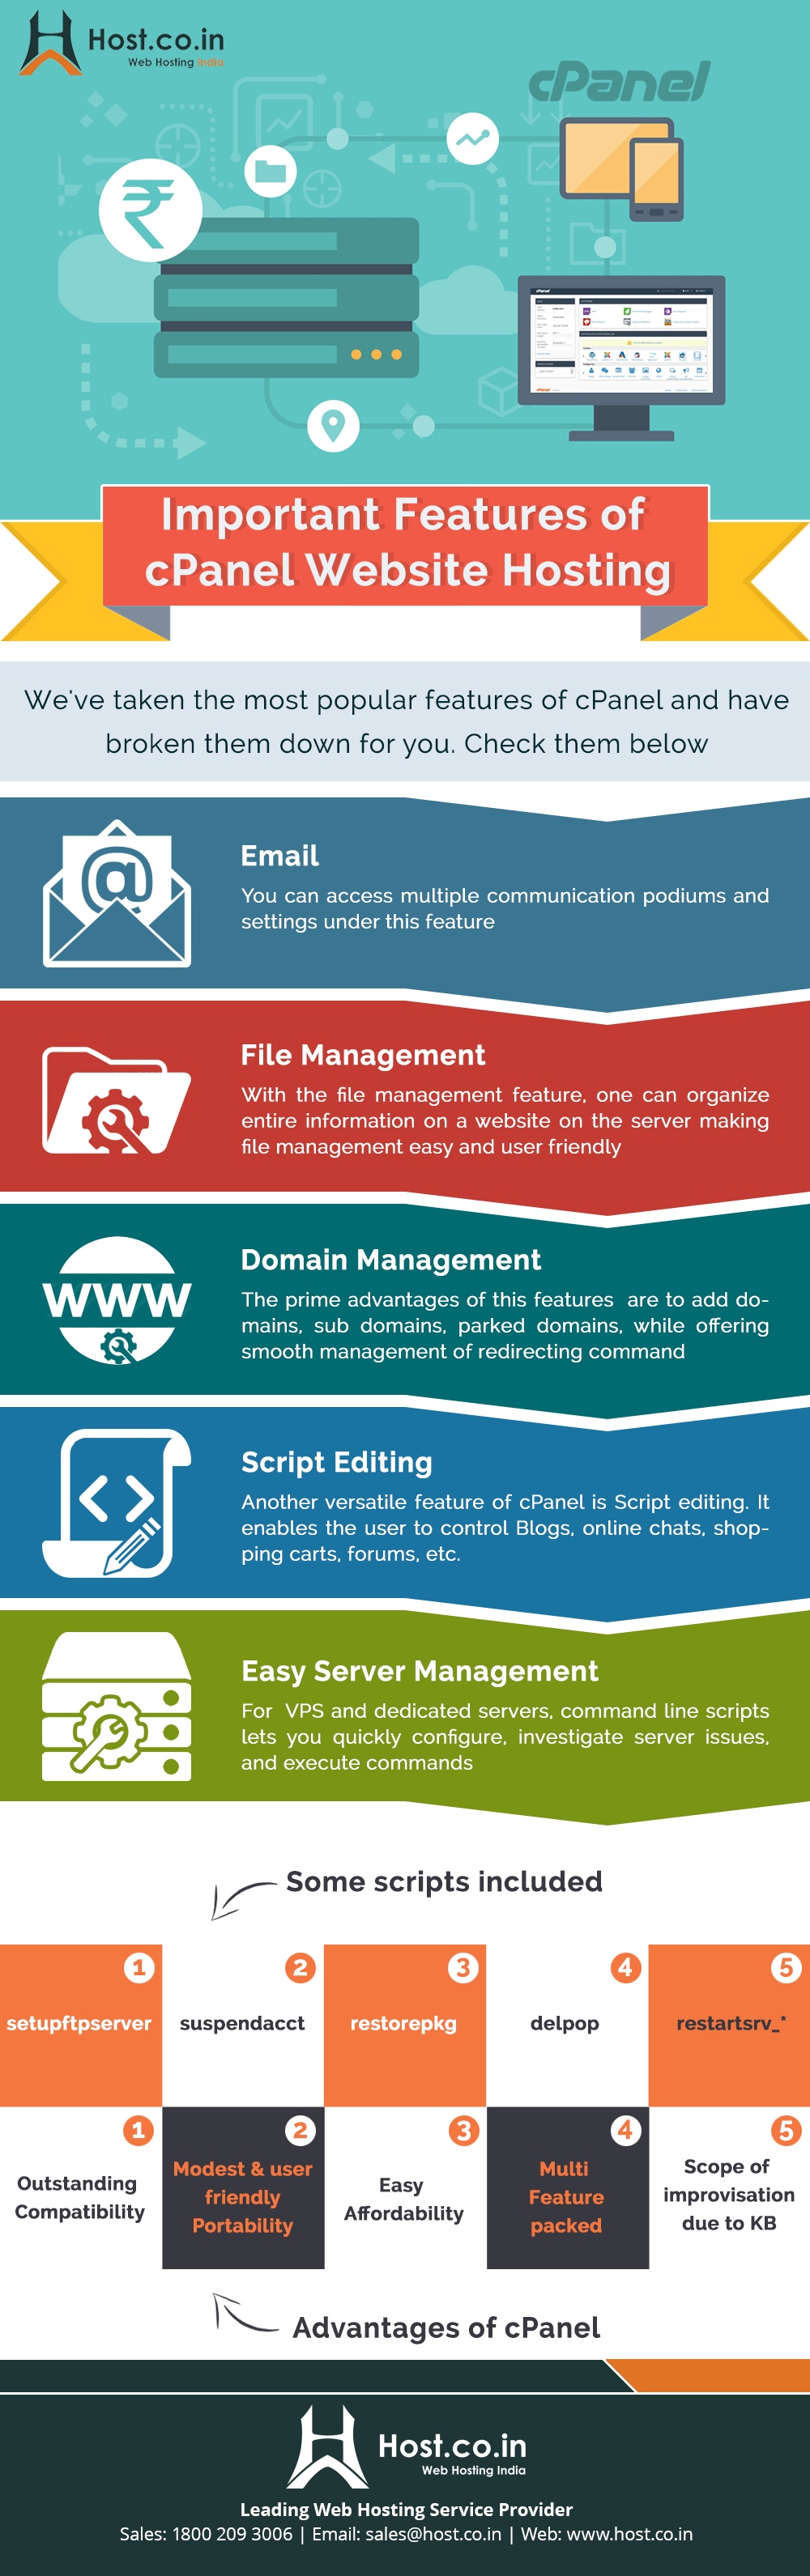 7 Important Features Of cPanel Website Hosting